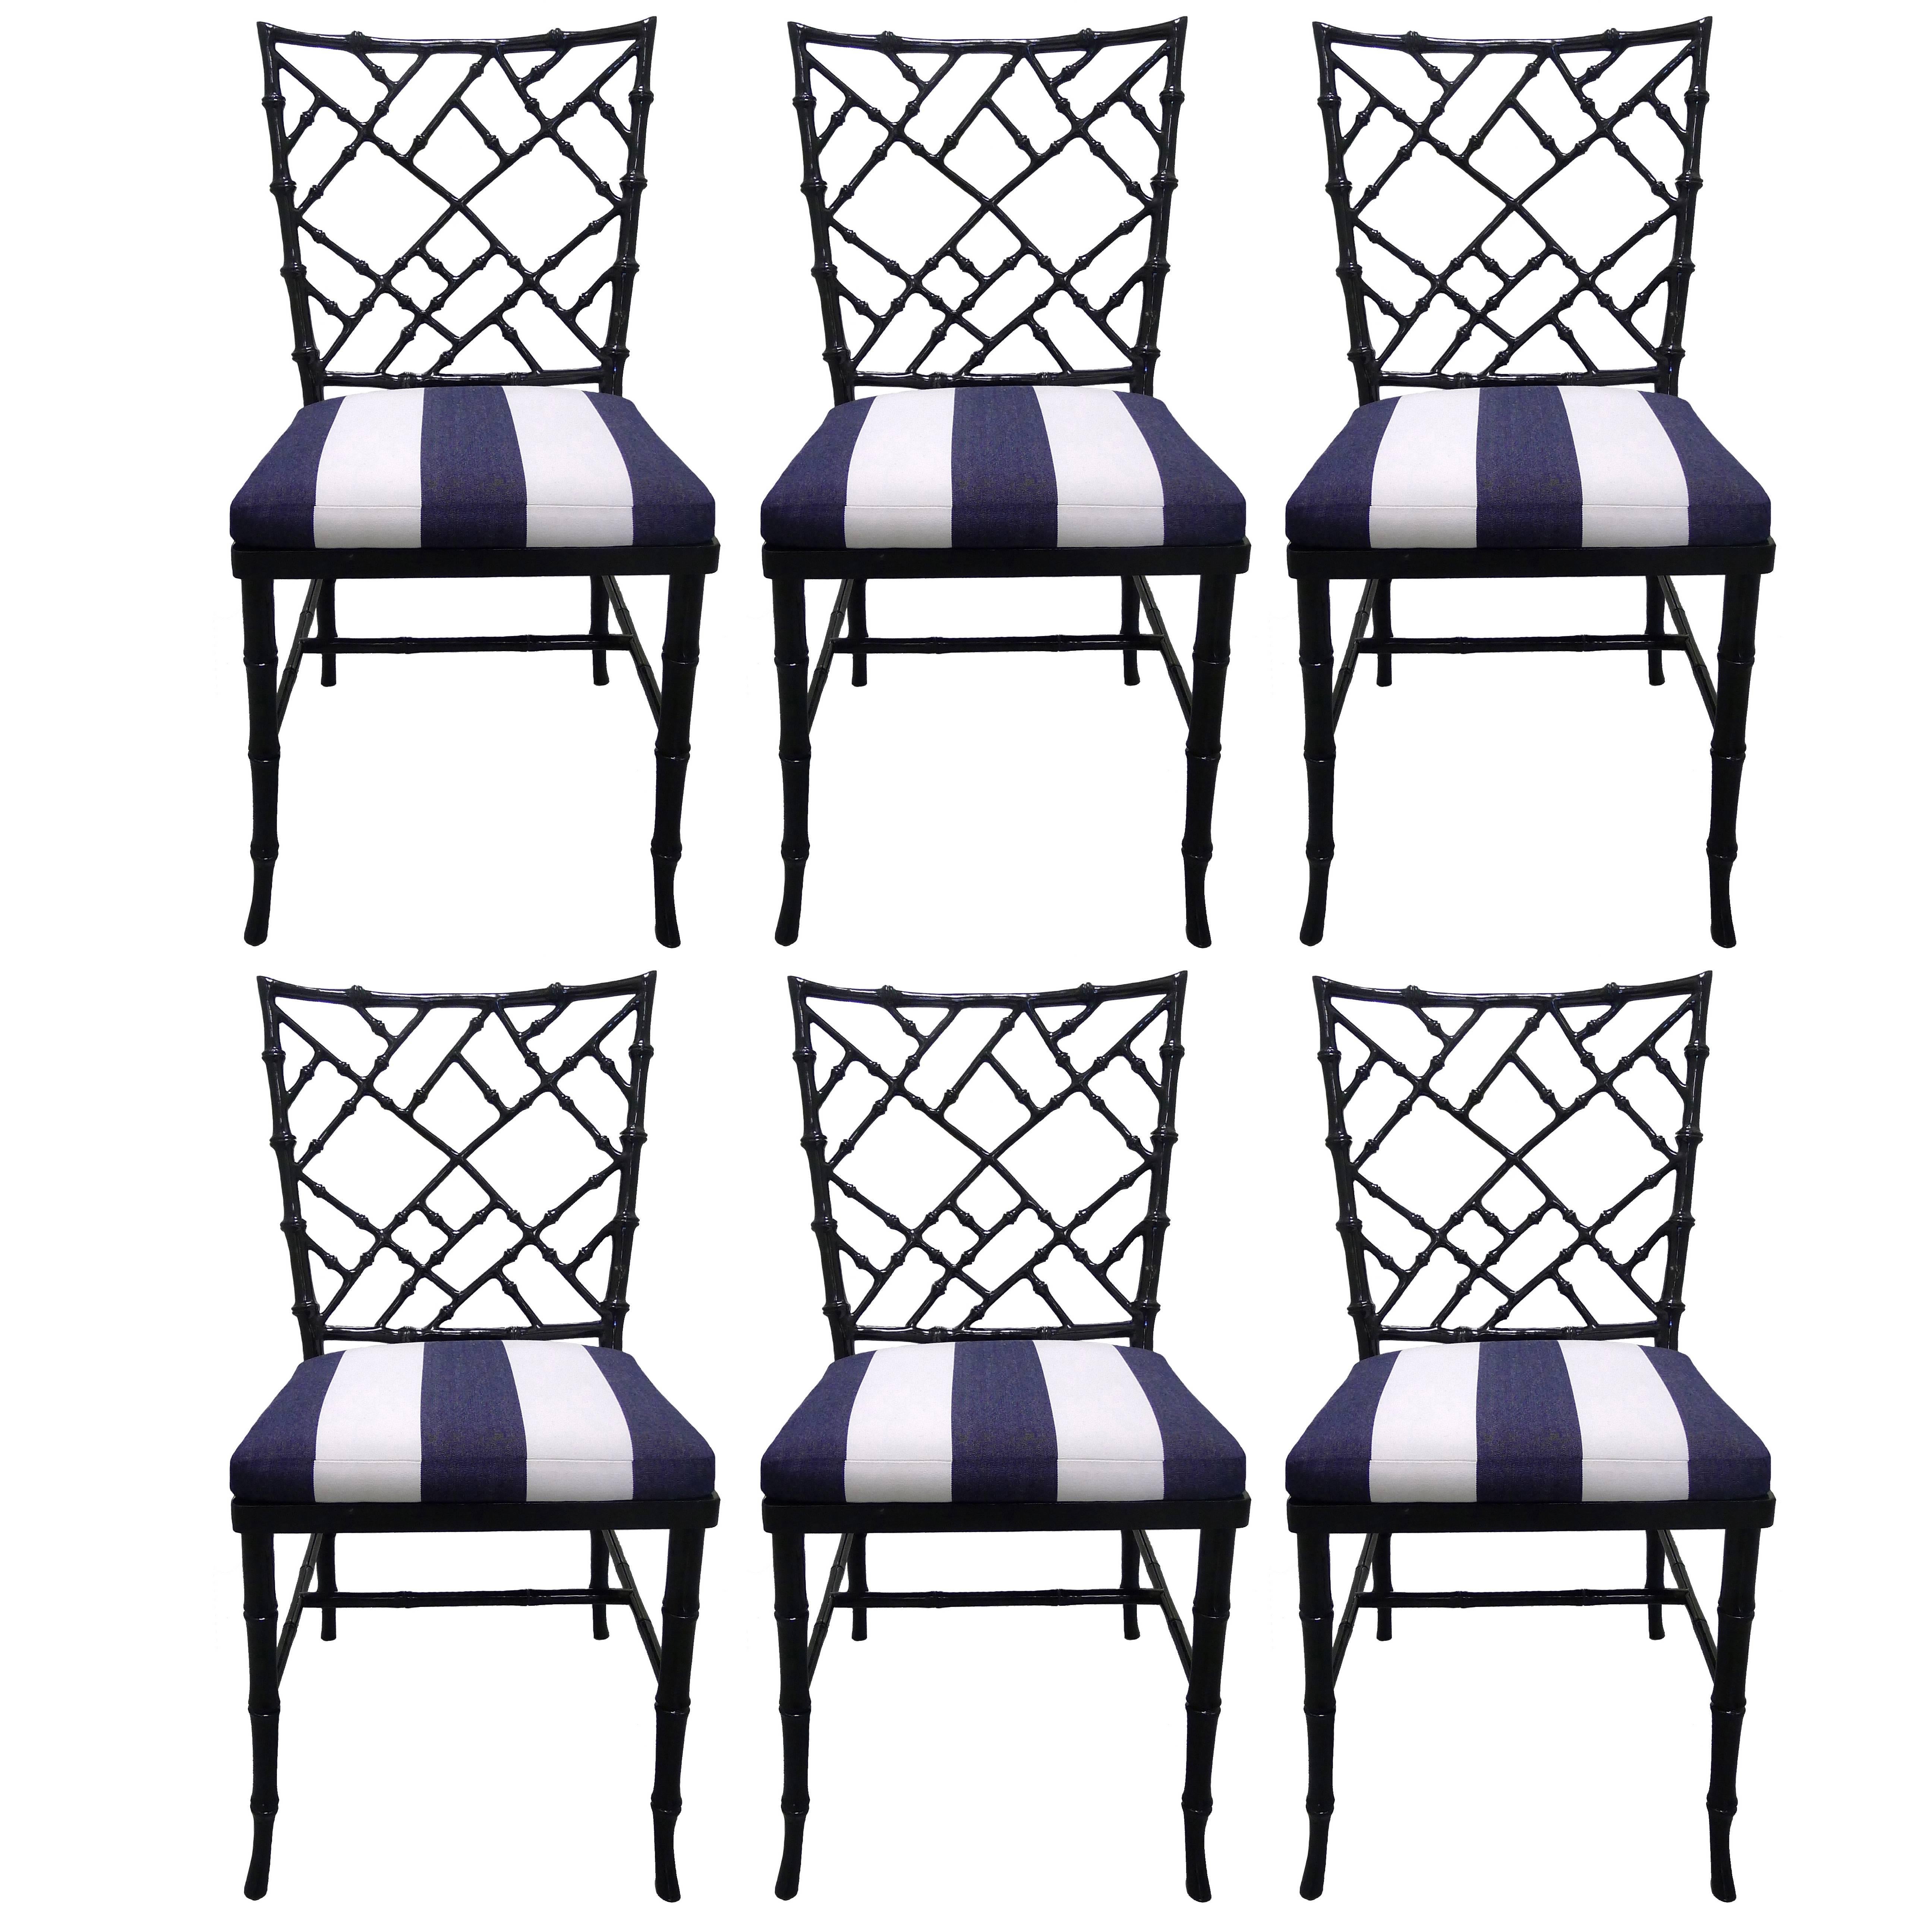 SALE Black Bamboo-Style Dining Chairs, Set of Six